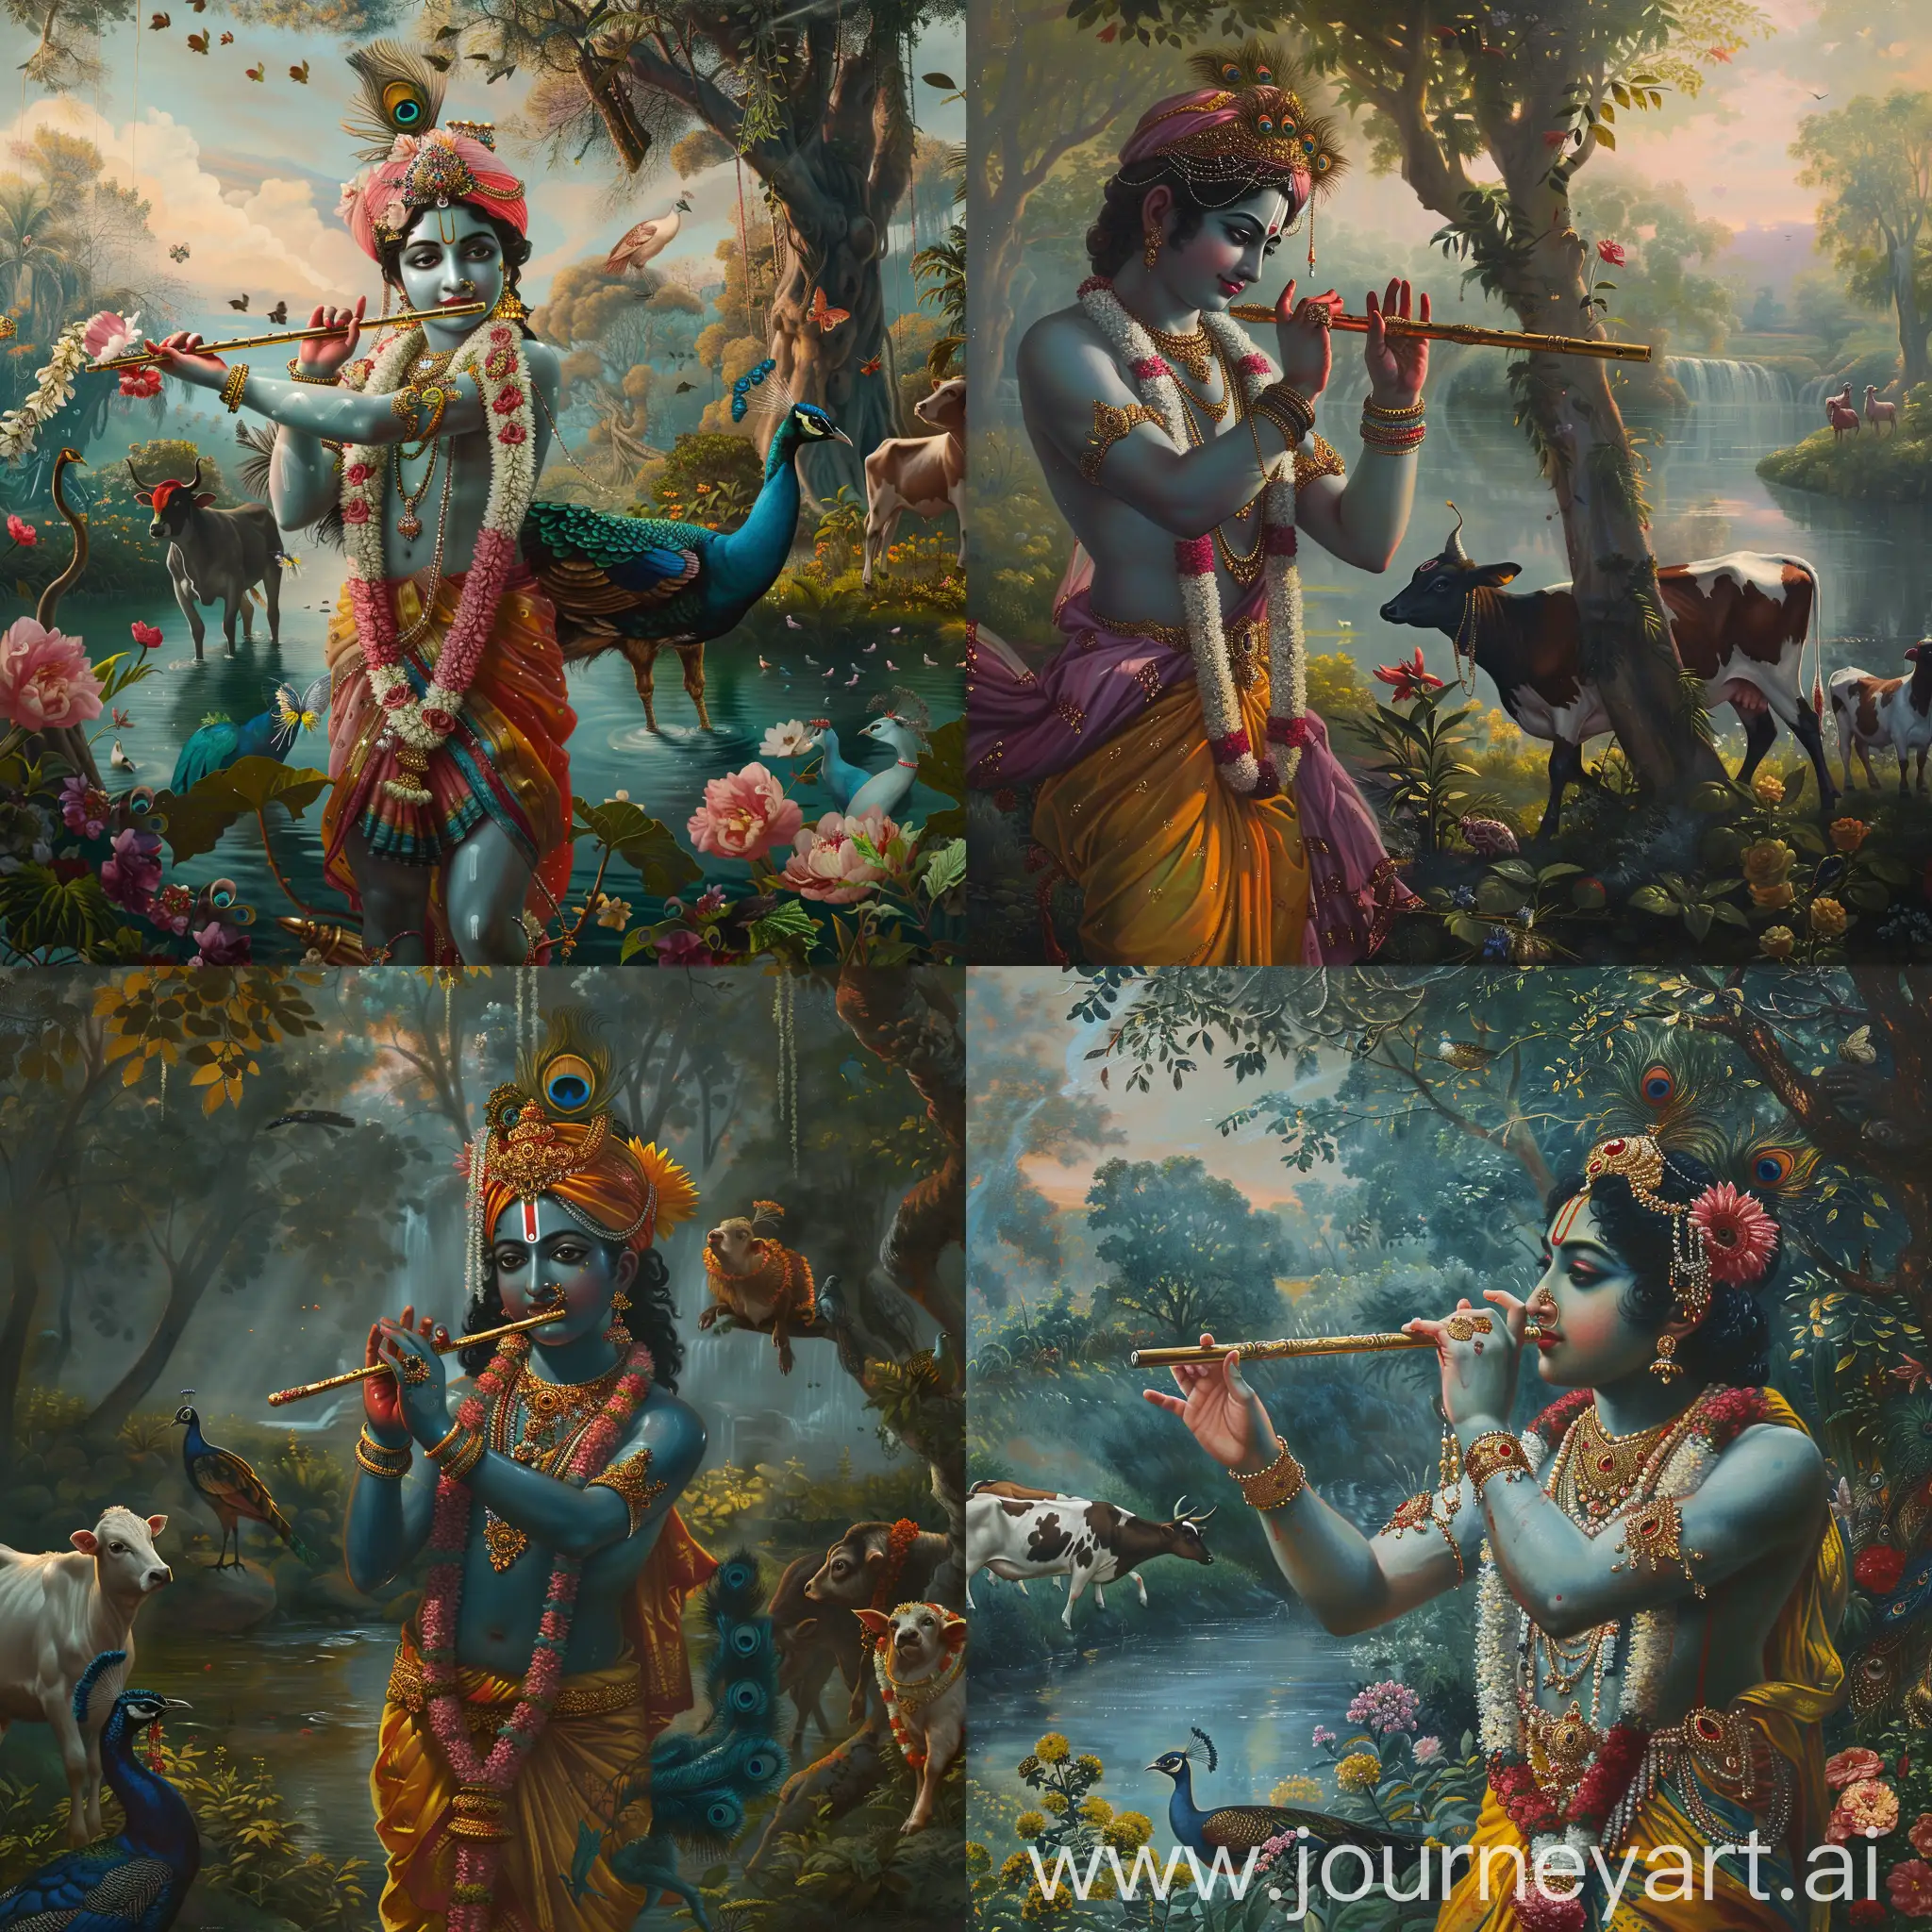 Divine-Lord-Krishna-Playing-Flute-in-Serene-Nature-Indian-Miniature-Painting-Style